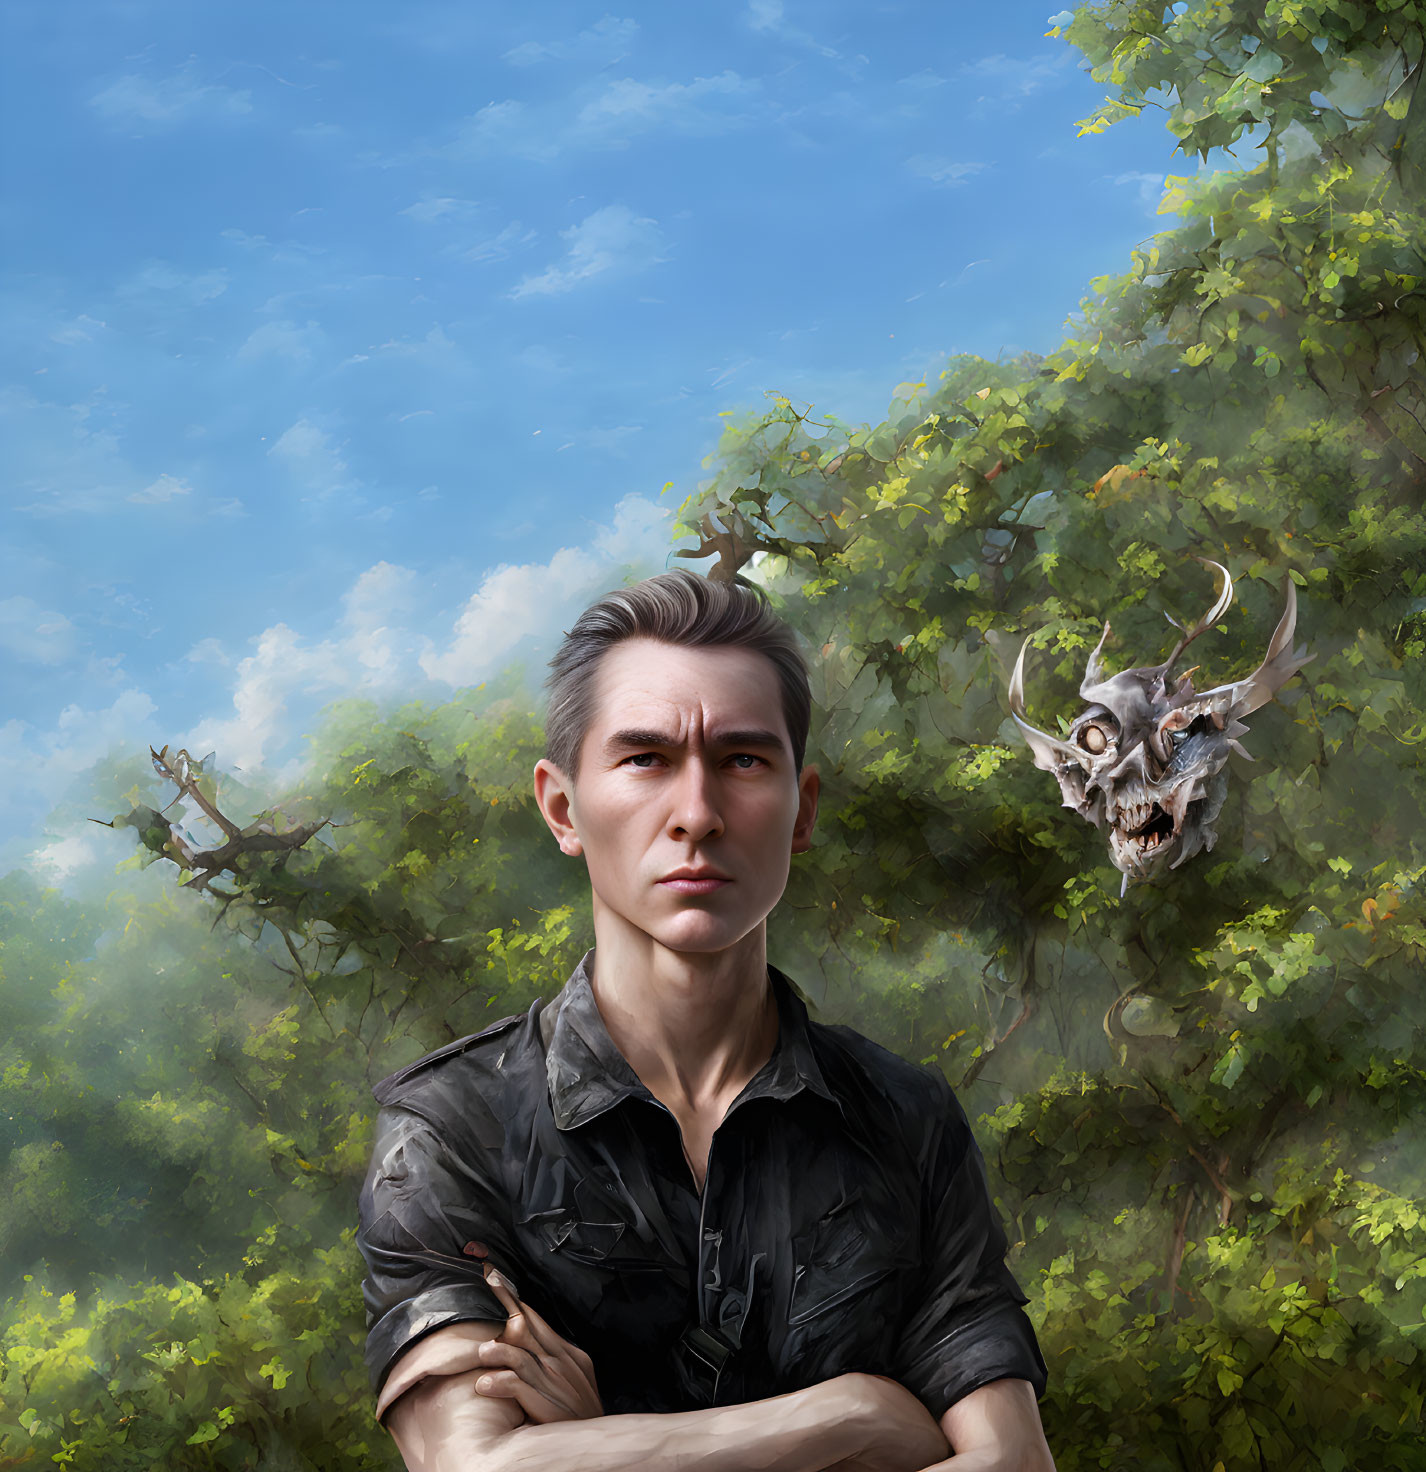 Grey-Haired Man in Black Shirt Contemplating Skull in Forest Setting